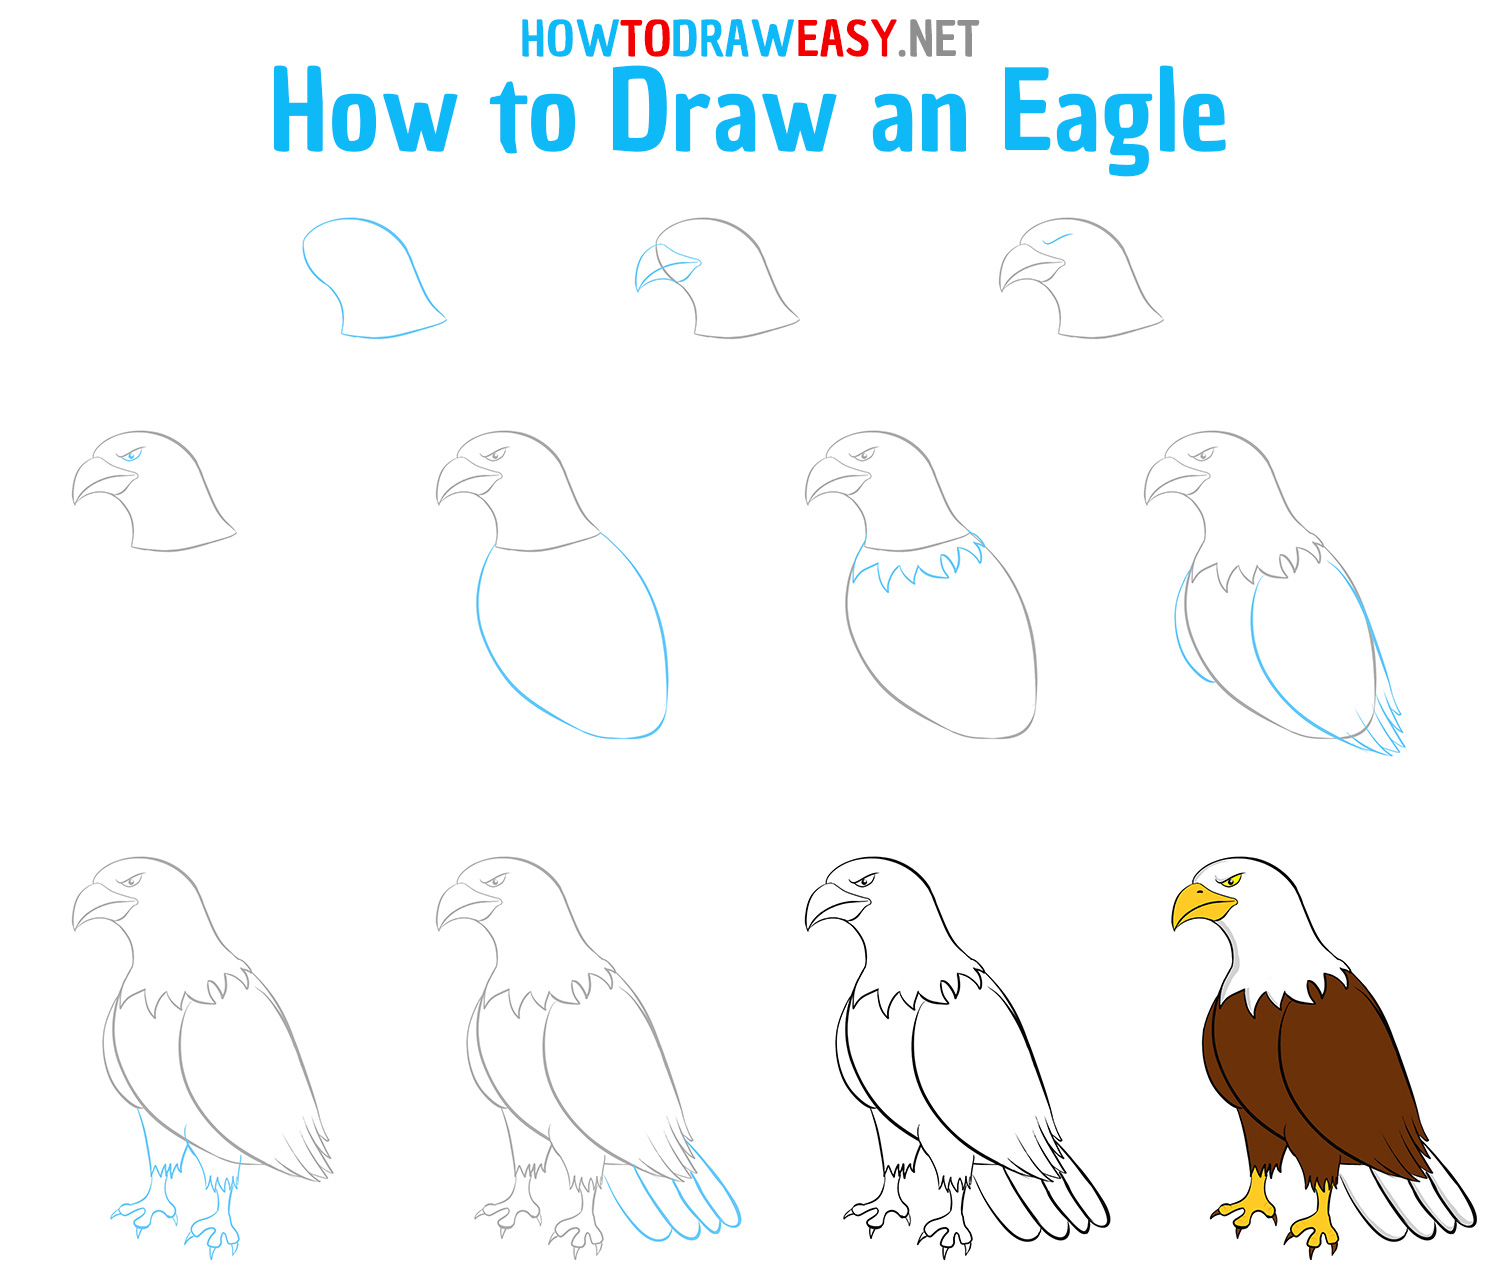 How to Draw an Easy Eagle Step by Step